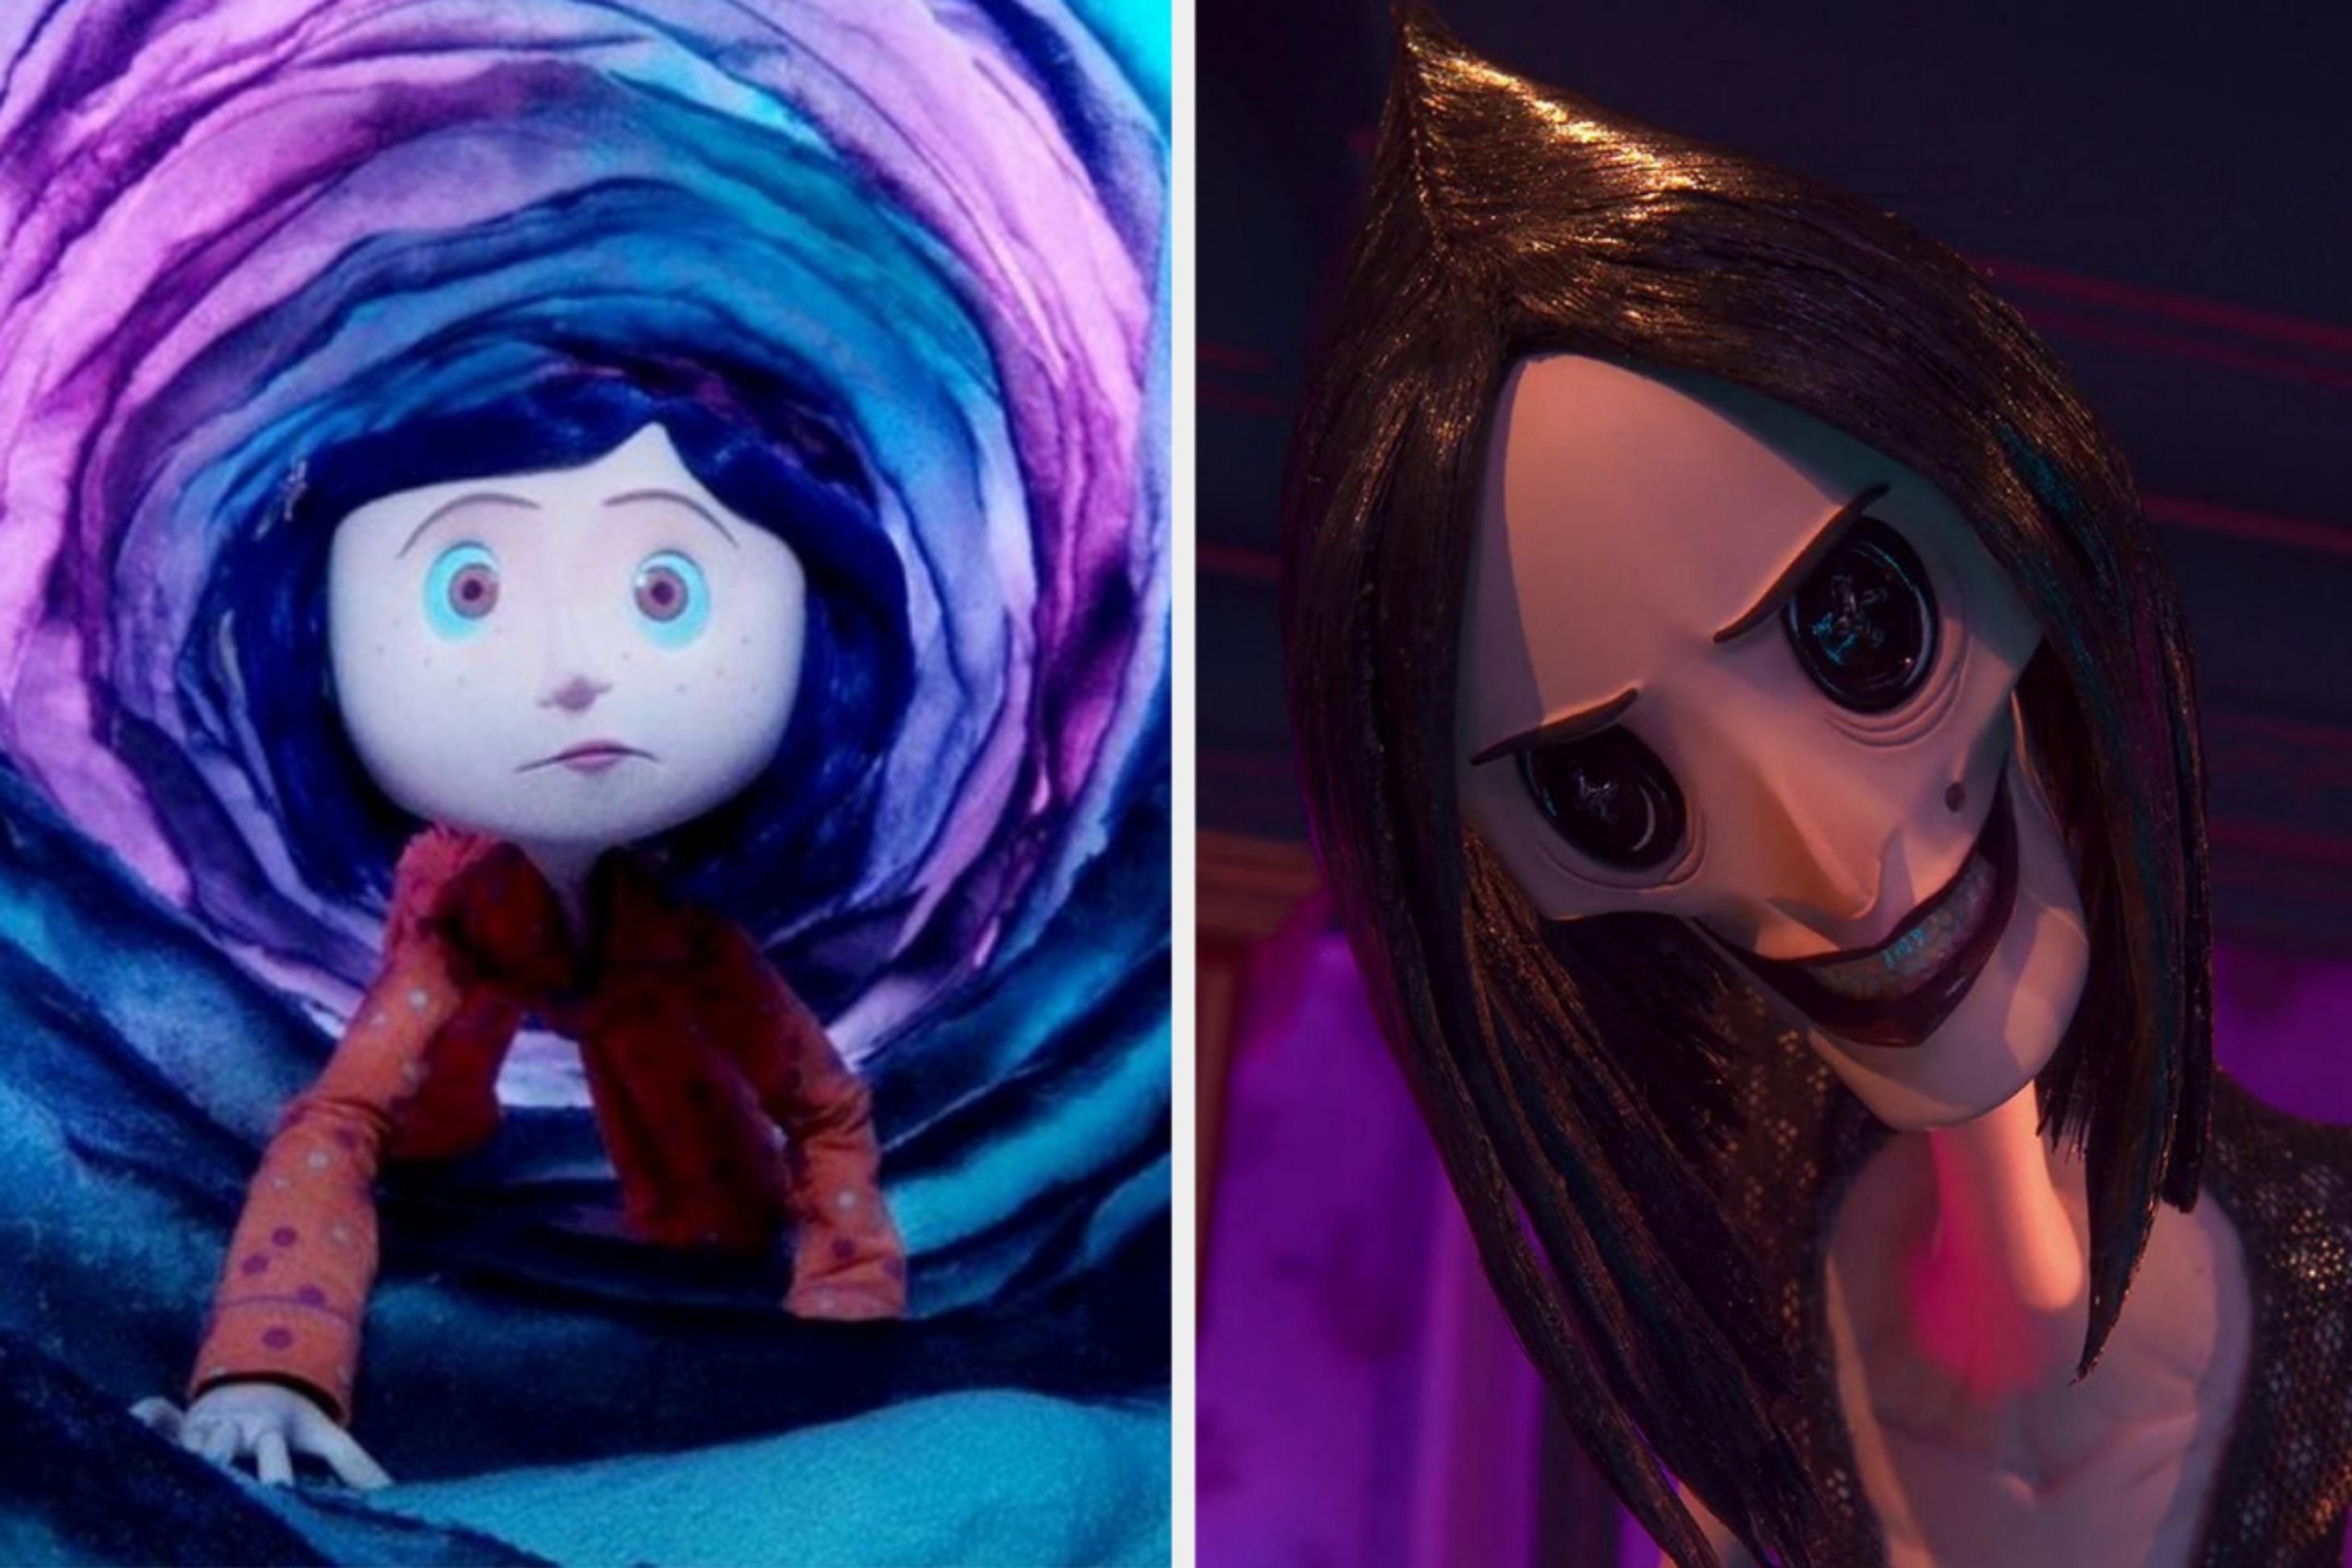 Two images: on the left, Coraline walking through the tunnel and on the right, an image of Other Mother